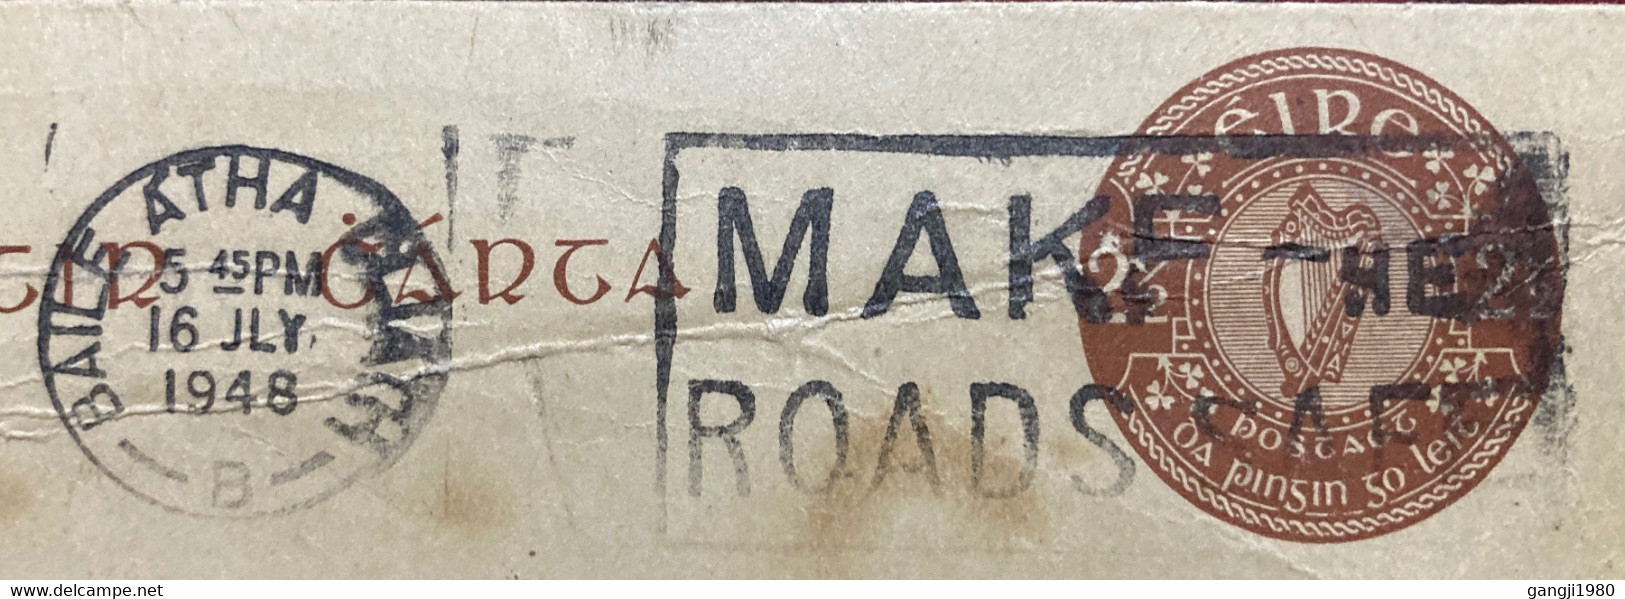 IRELAND 1948, BAILE ATHA CLIATH , CITY CANCELLATION SLOGAN MAKE THE ROADS SAEE ,POSTAL STATIONERY USED CARD - Lettres & Documents